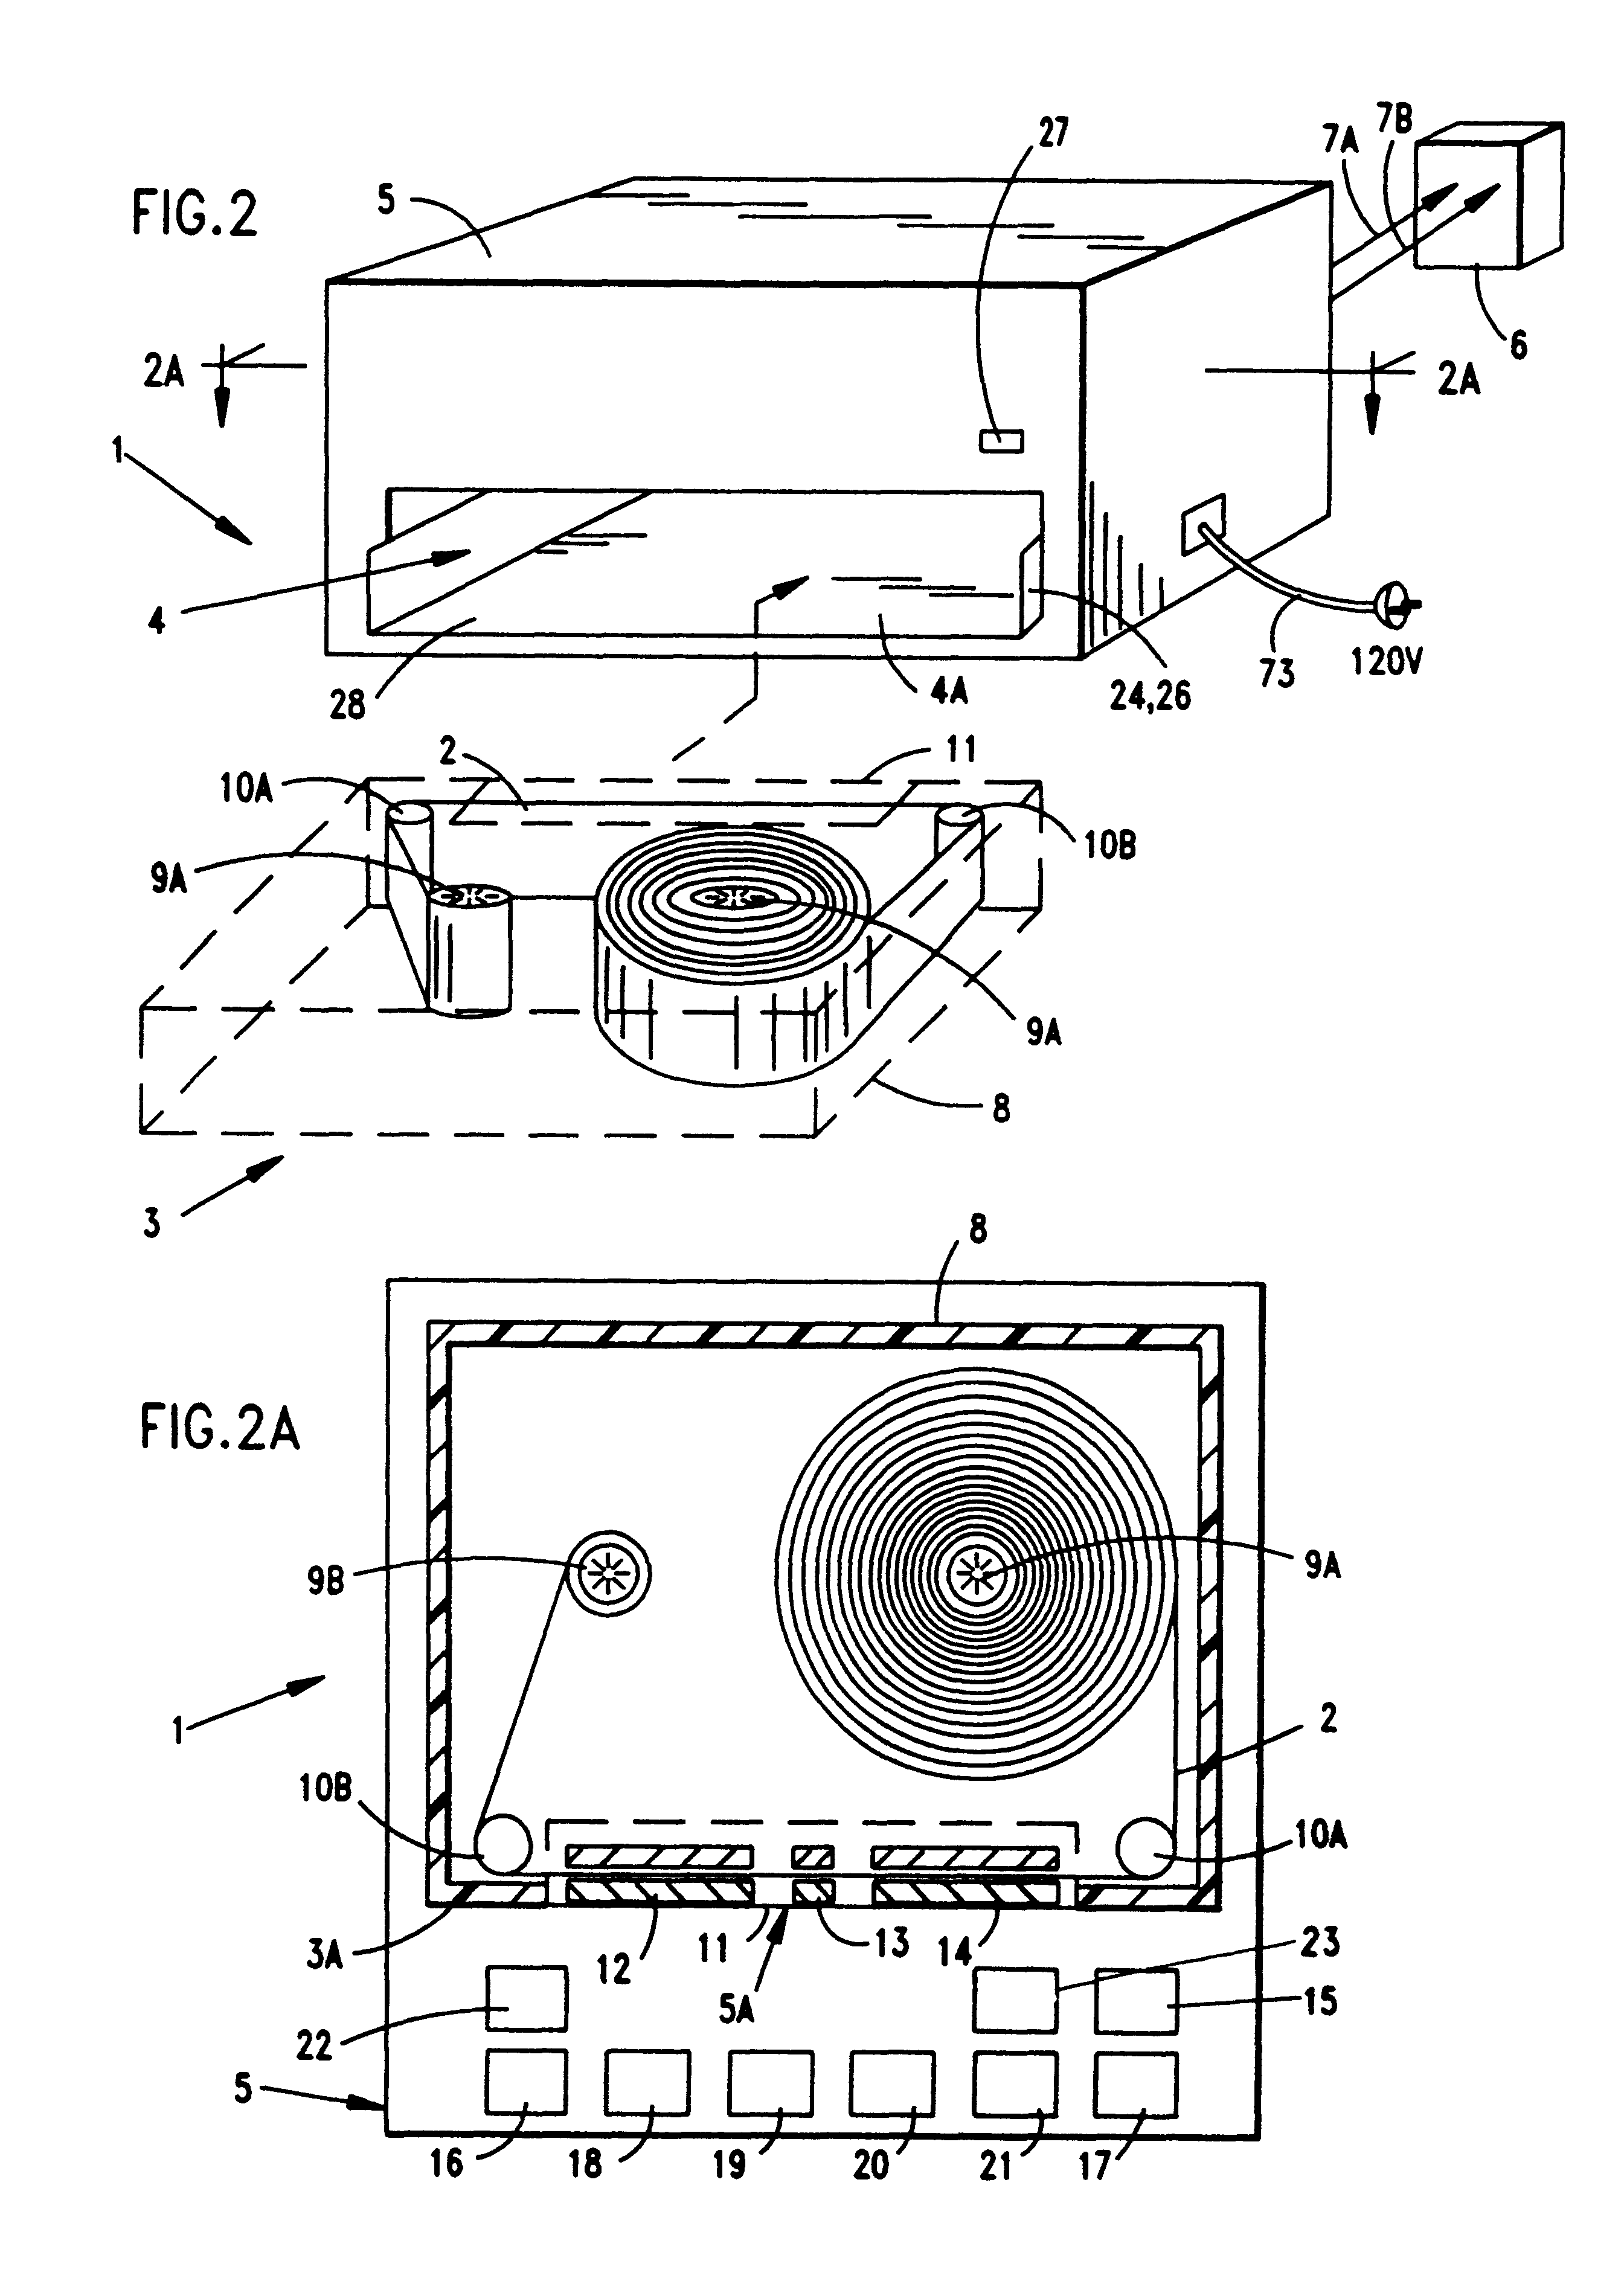 System and method for producing electrical power using metal-air fuel cell battery technology